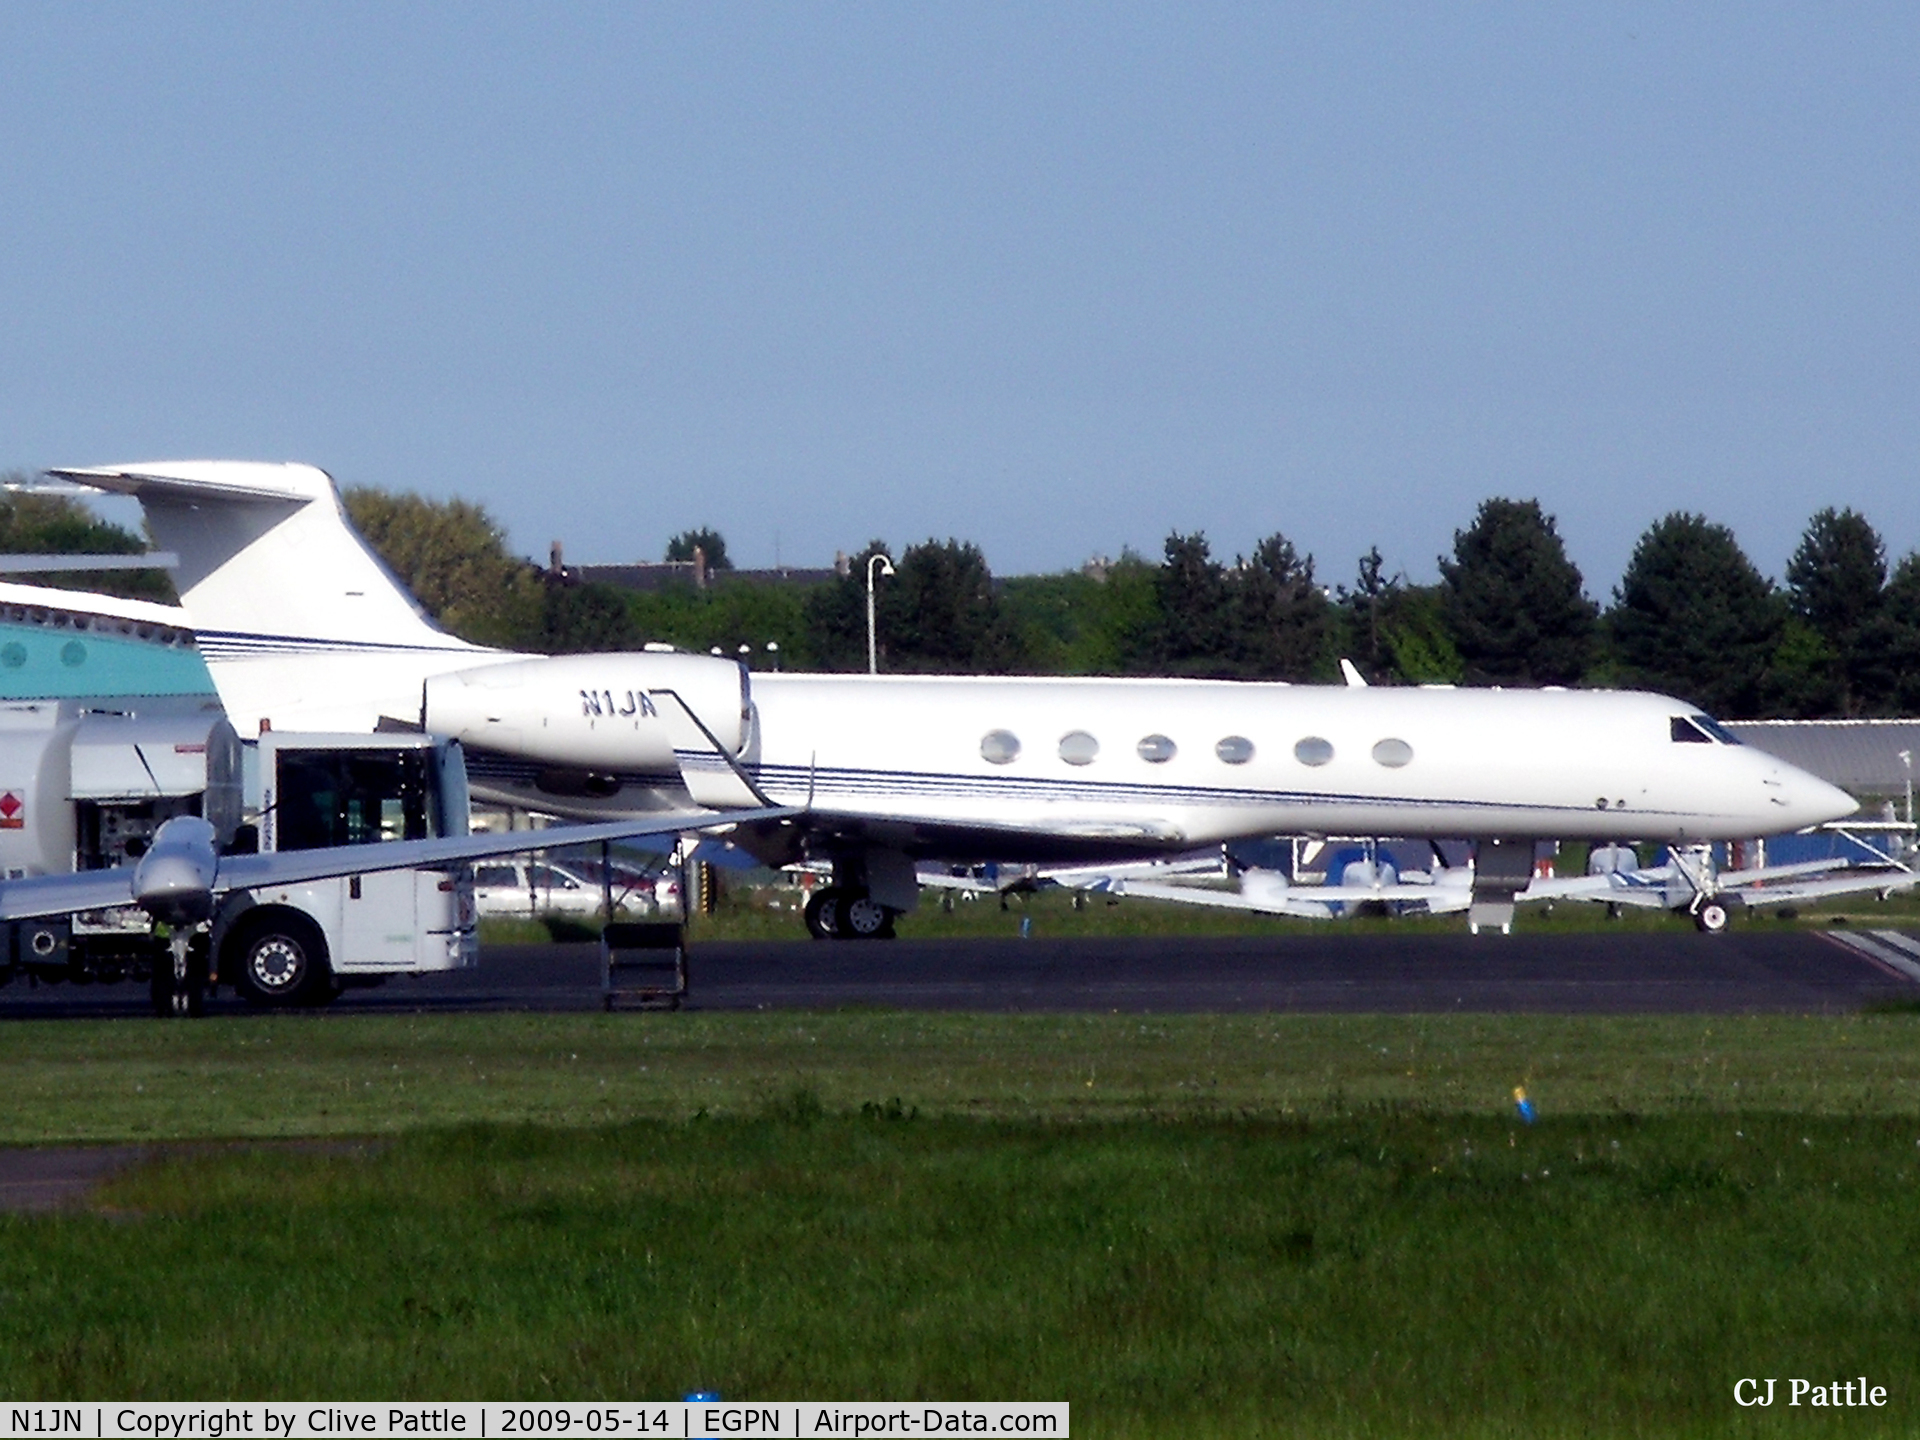 N1JN, 1998 Gulfstream Aerospace G-V C/N 538, On the apron at Dundee Riverside EGPN - Owner (Jack Nicklaus) visiting the Golf at St Andrews ?